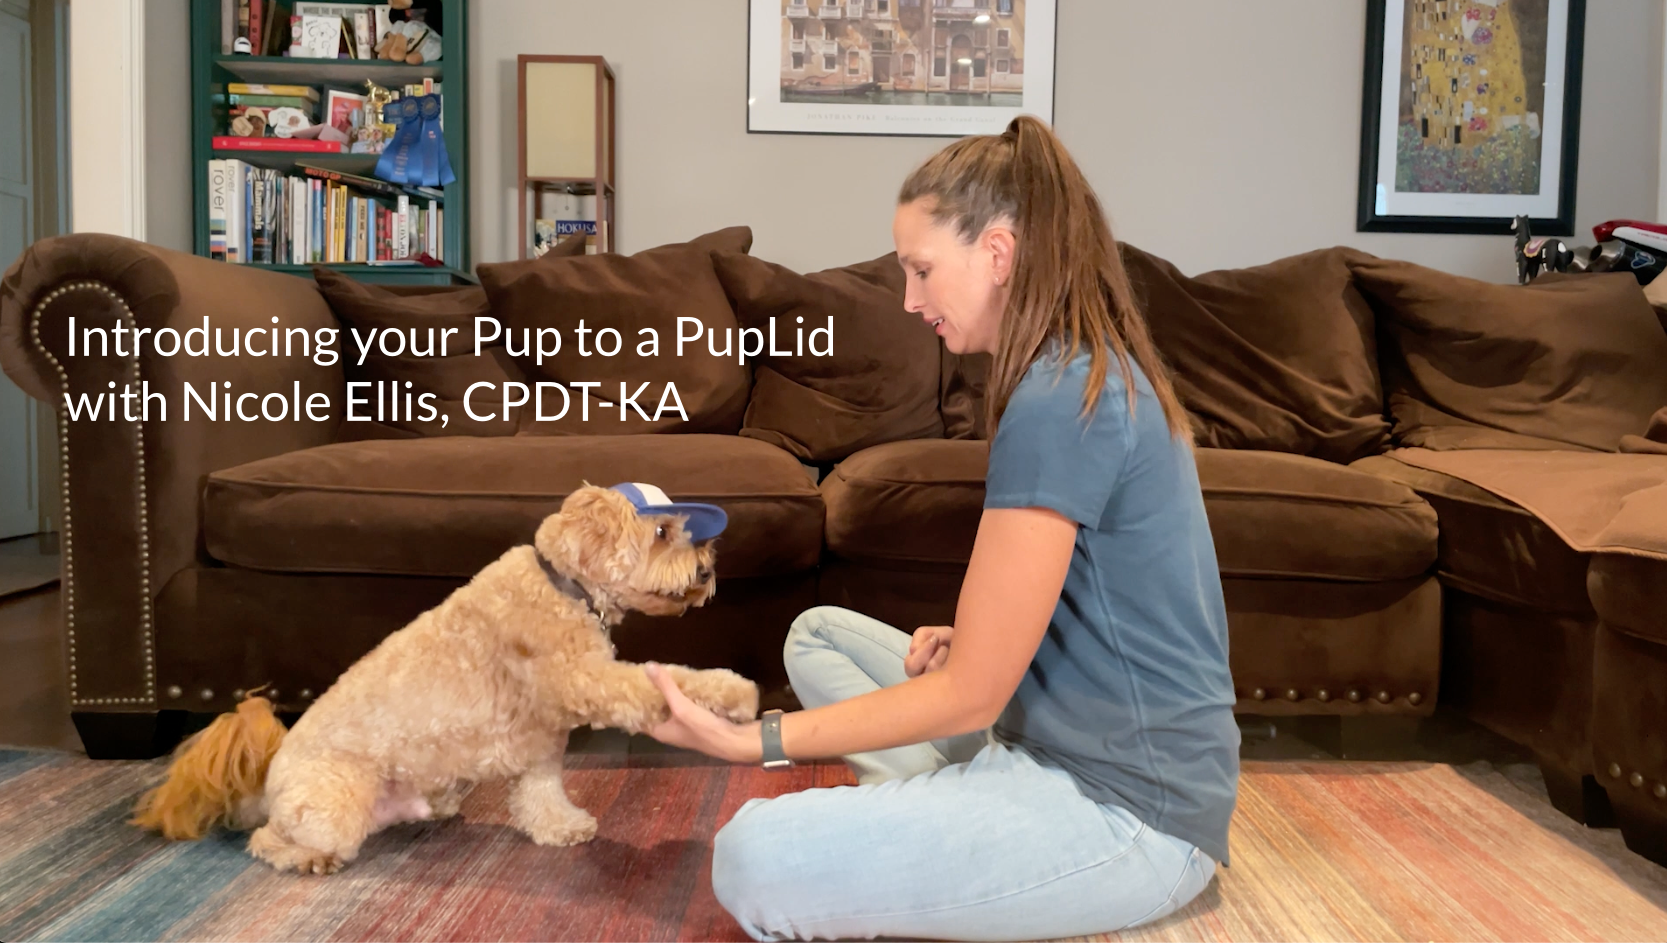 Load video: Short video by Nicole Ellis, CPDT-KA on how to introduce your dog to a PupLid. This is essential in training your dog to wear a hat using positive reinforcement.